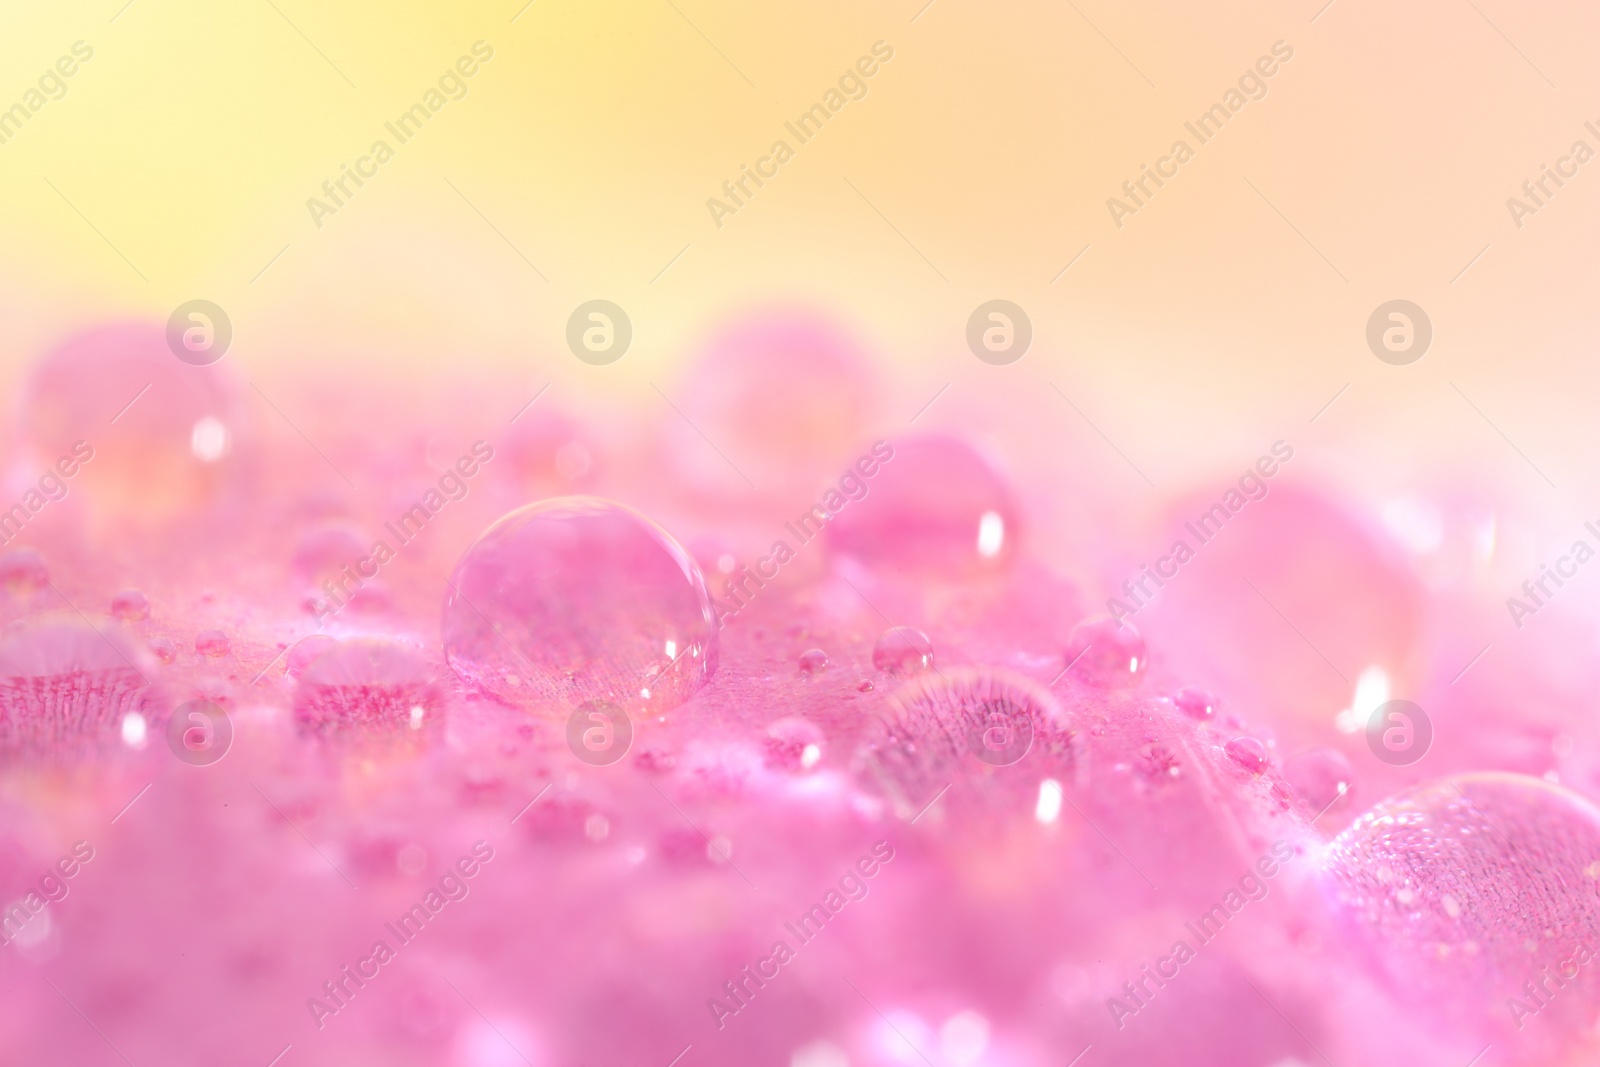 Photo of Beautiful flower with water drops on blurred background, macro view